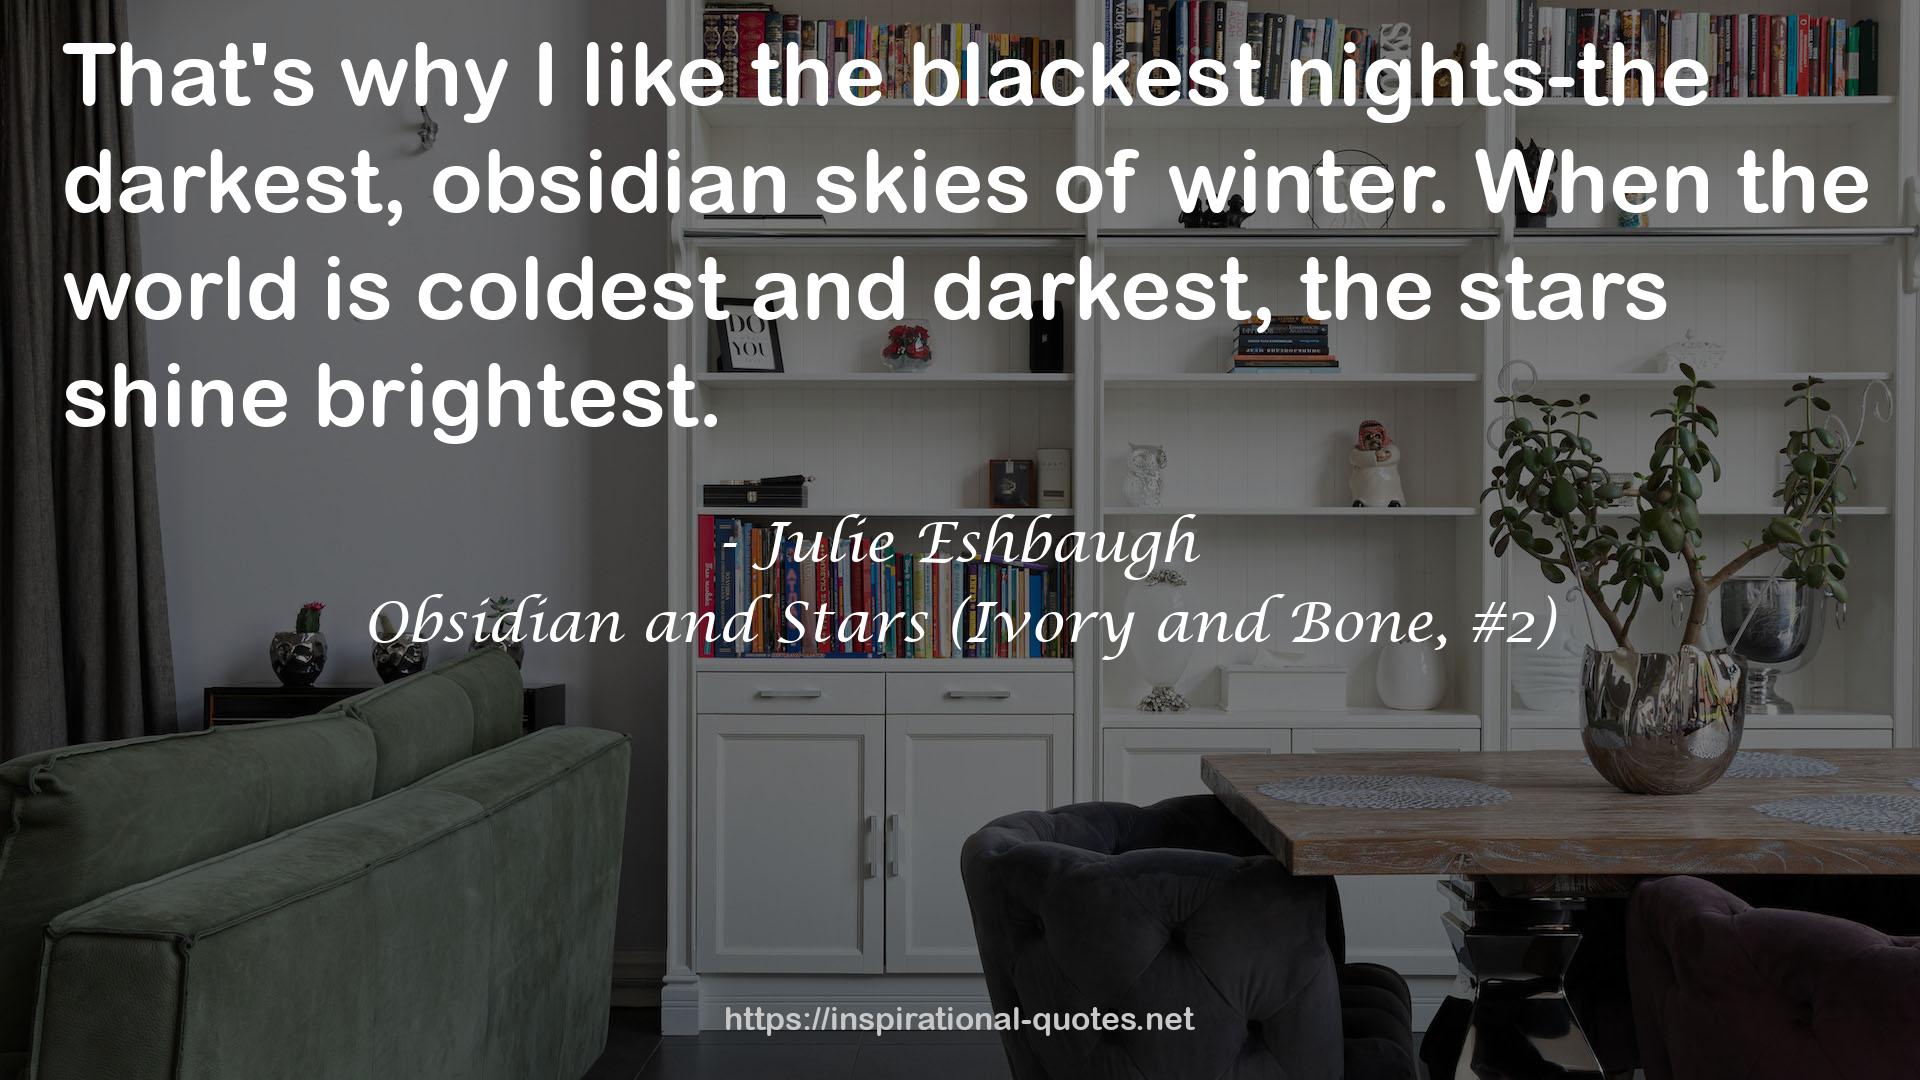 Obsidian and Stars (Ivory and Bone, #2) QUOTES